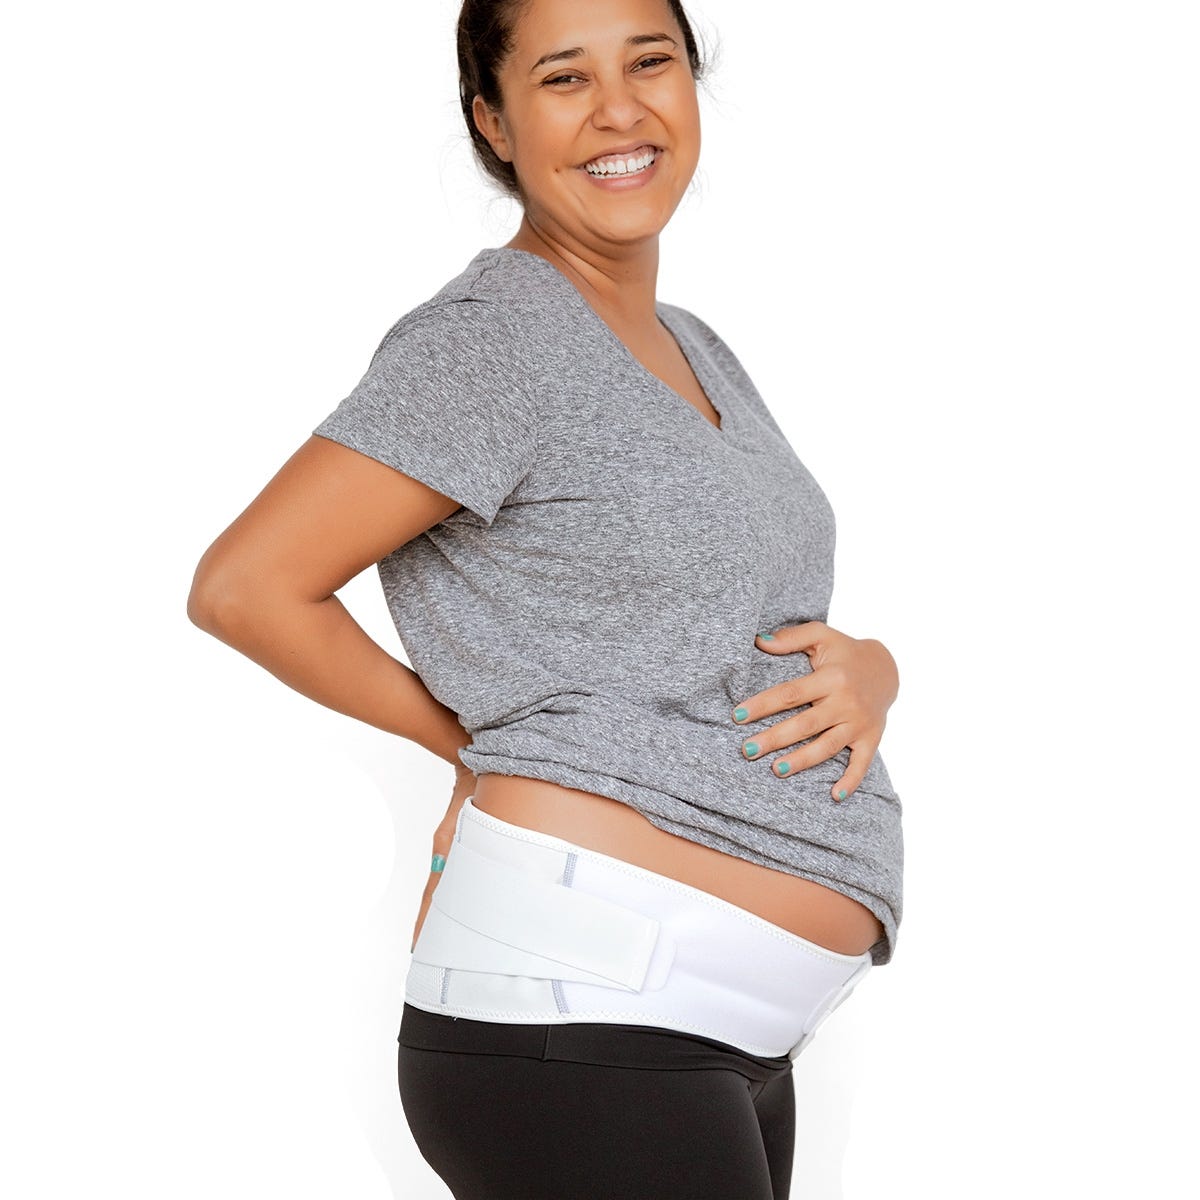 Womens Maternity Support Belly Band Made in USA 